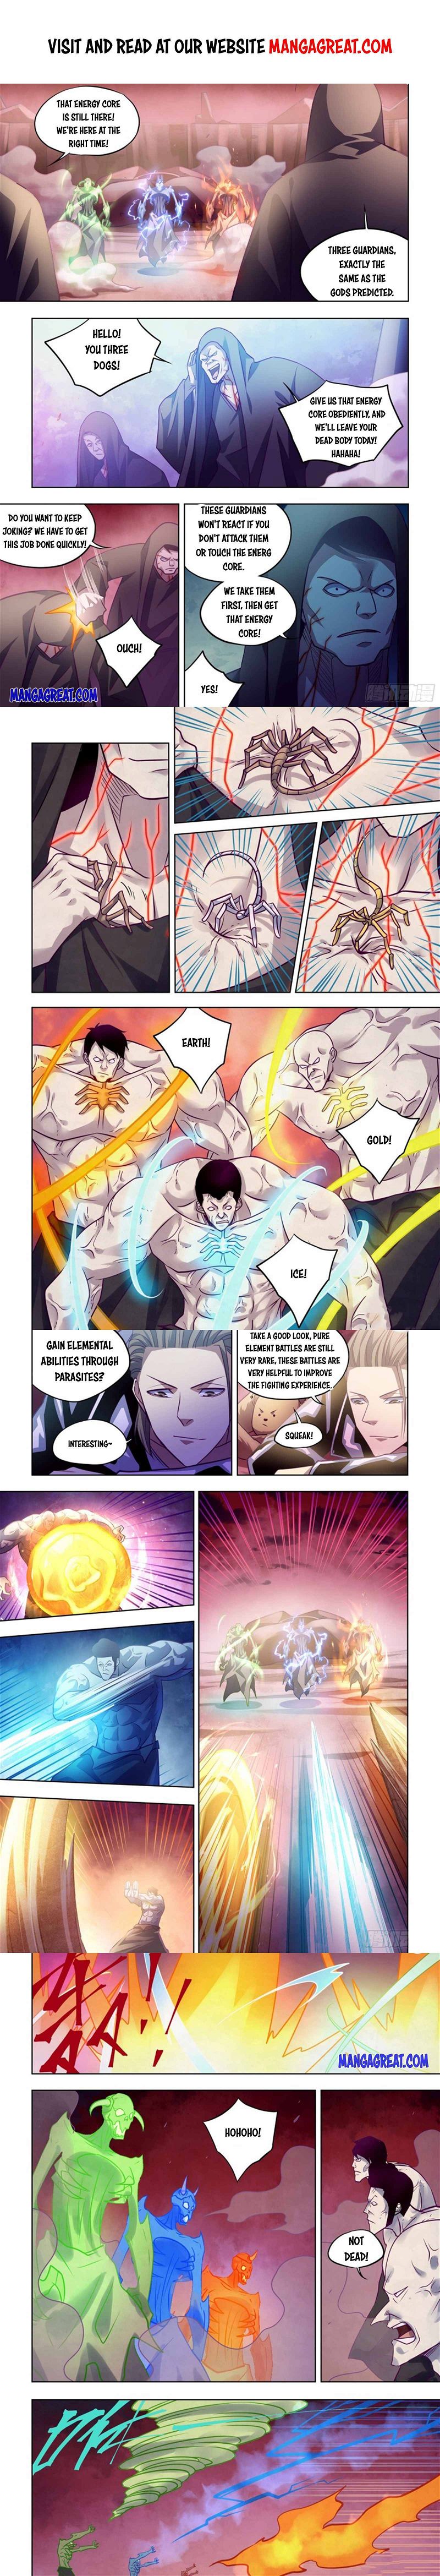 The Last Human Chapter 354 page 1